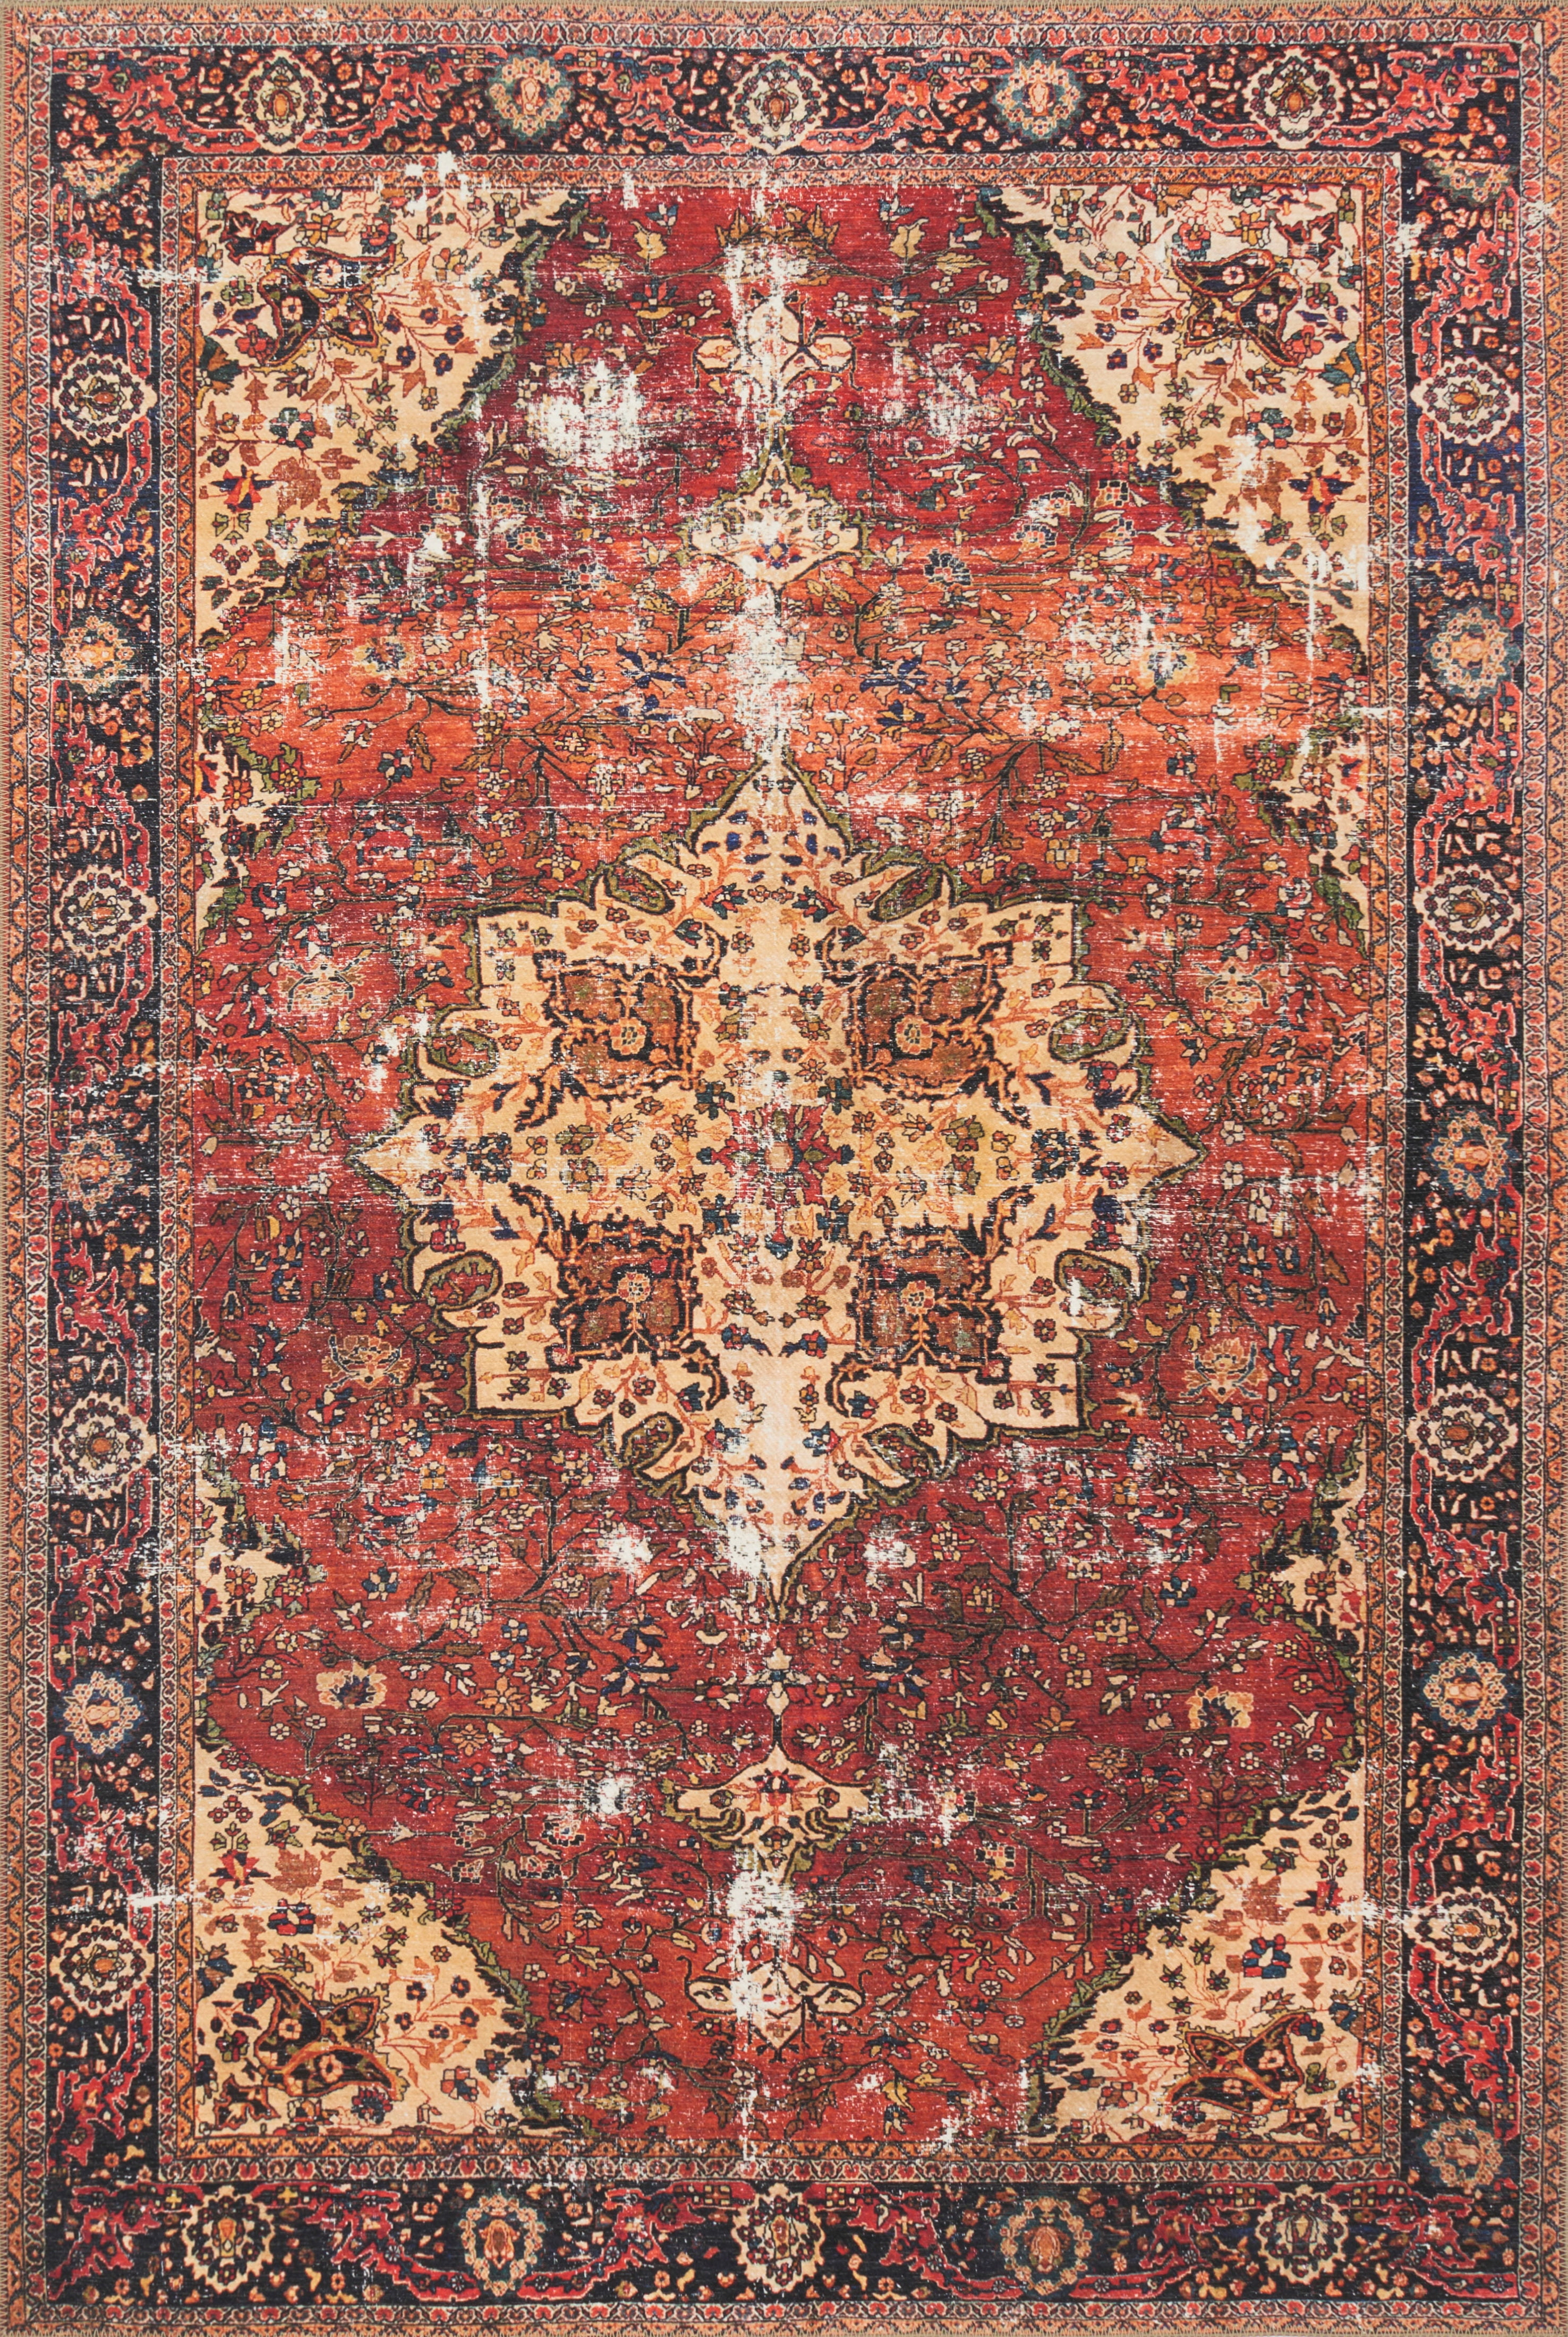 Loloi - Loren Collection - LQ-07 Red / Navy - Area Rug